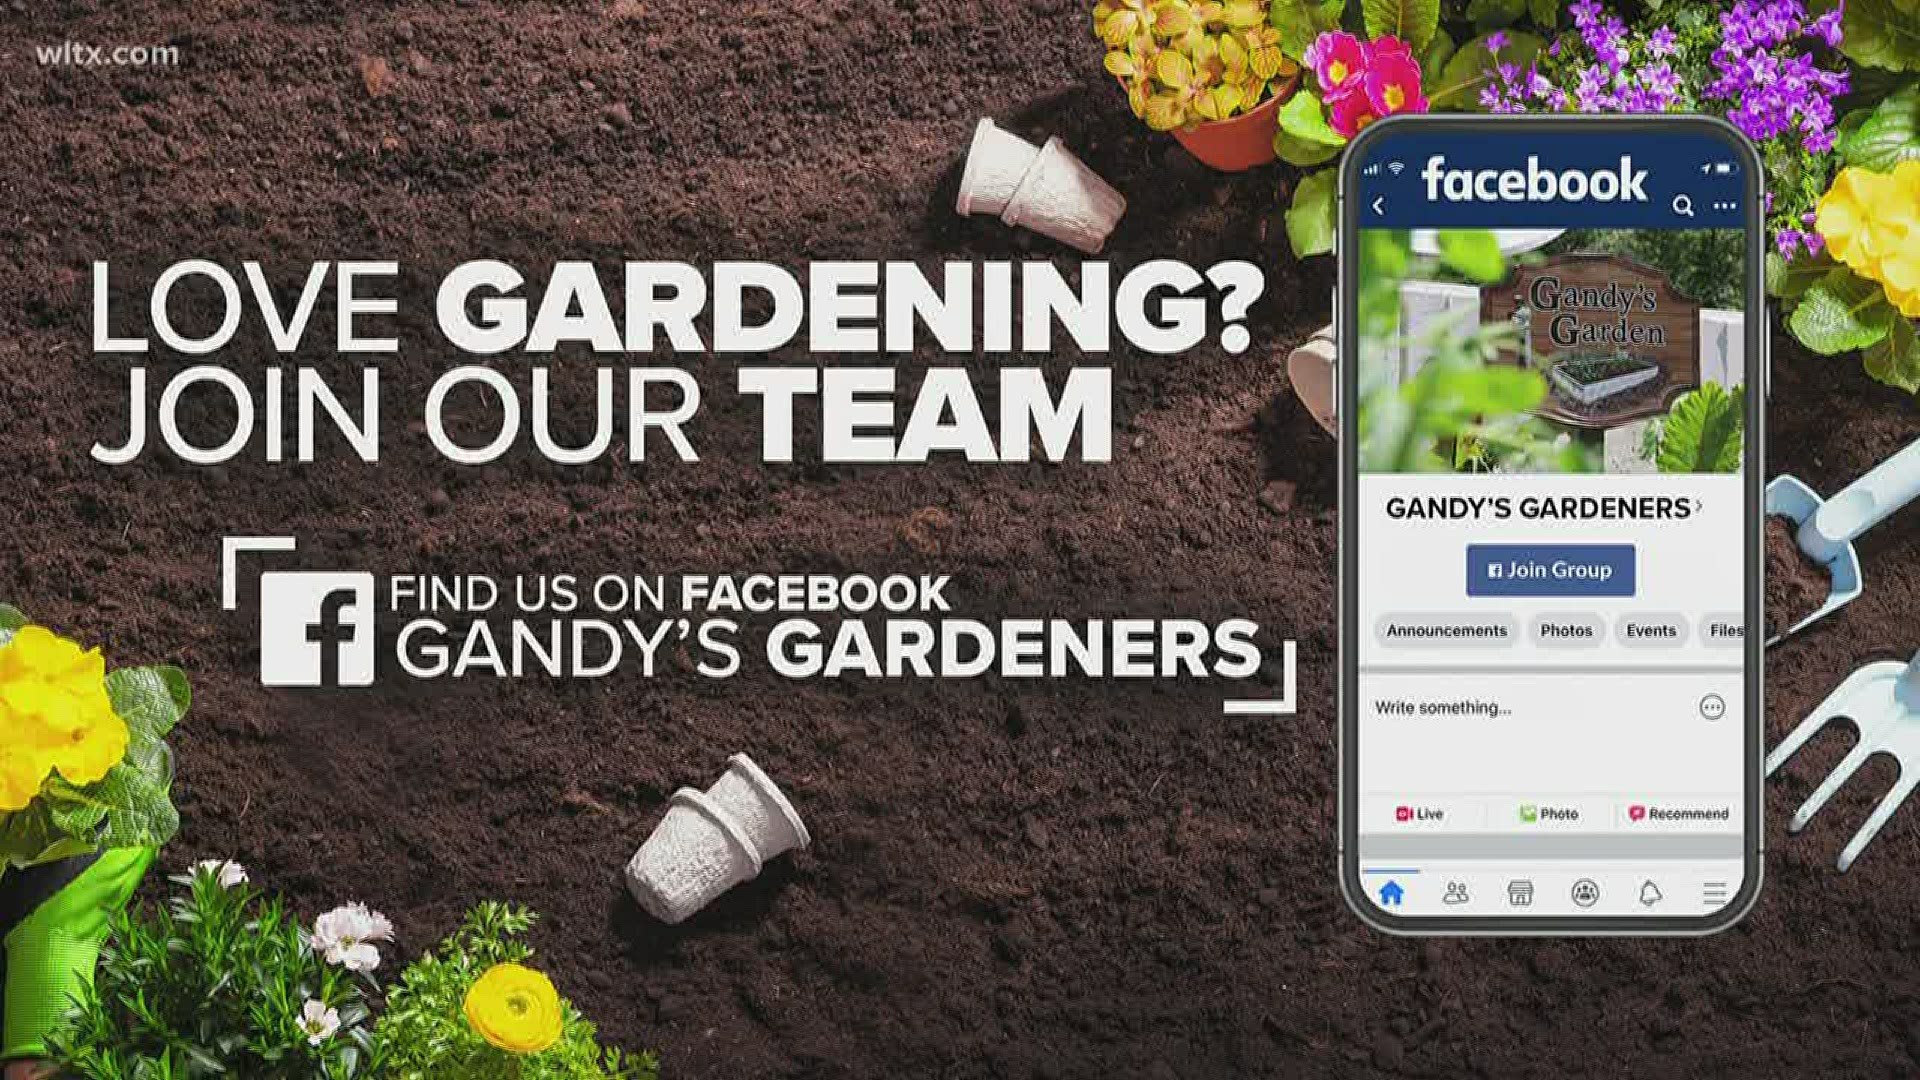 Earth Day enters its 50th year and to celebrate the milestone, Meteorologist Alex Calamia shows us how Gandy's Garden got its start.